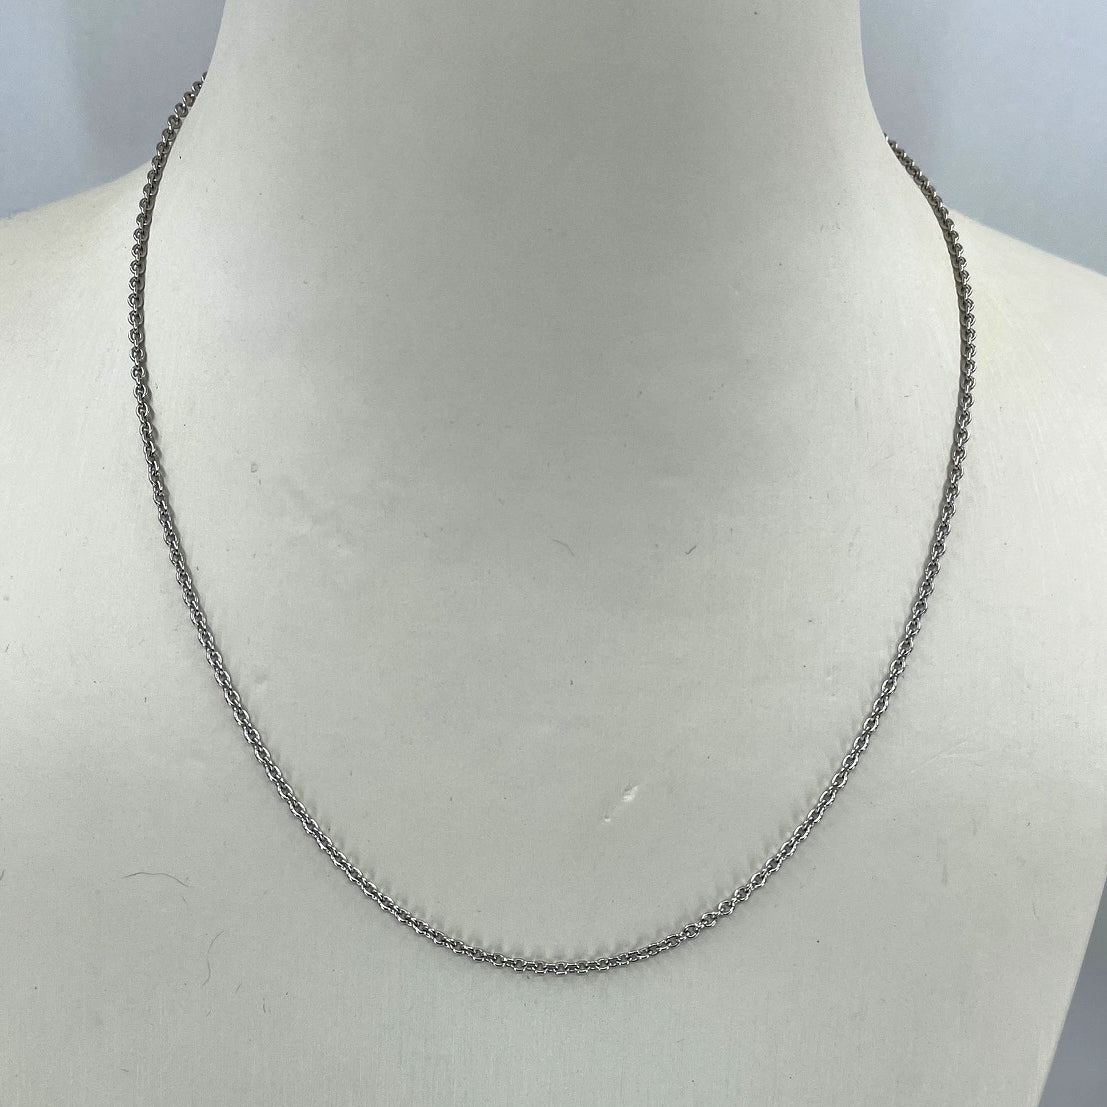 18K Solid White Gold Cable Link Chain 16" 4.6 Grams